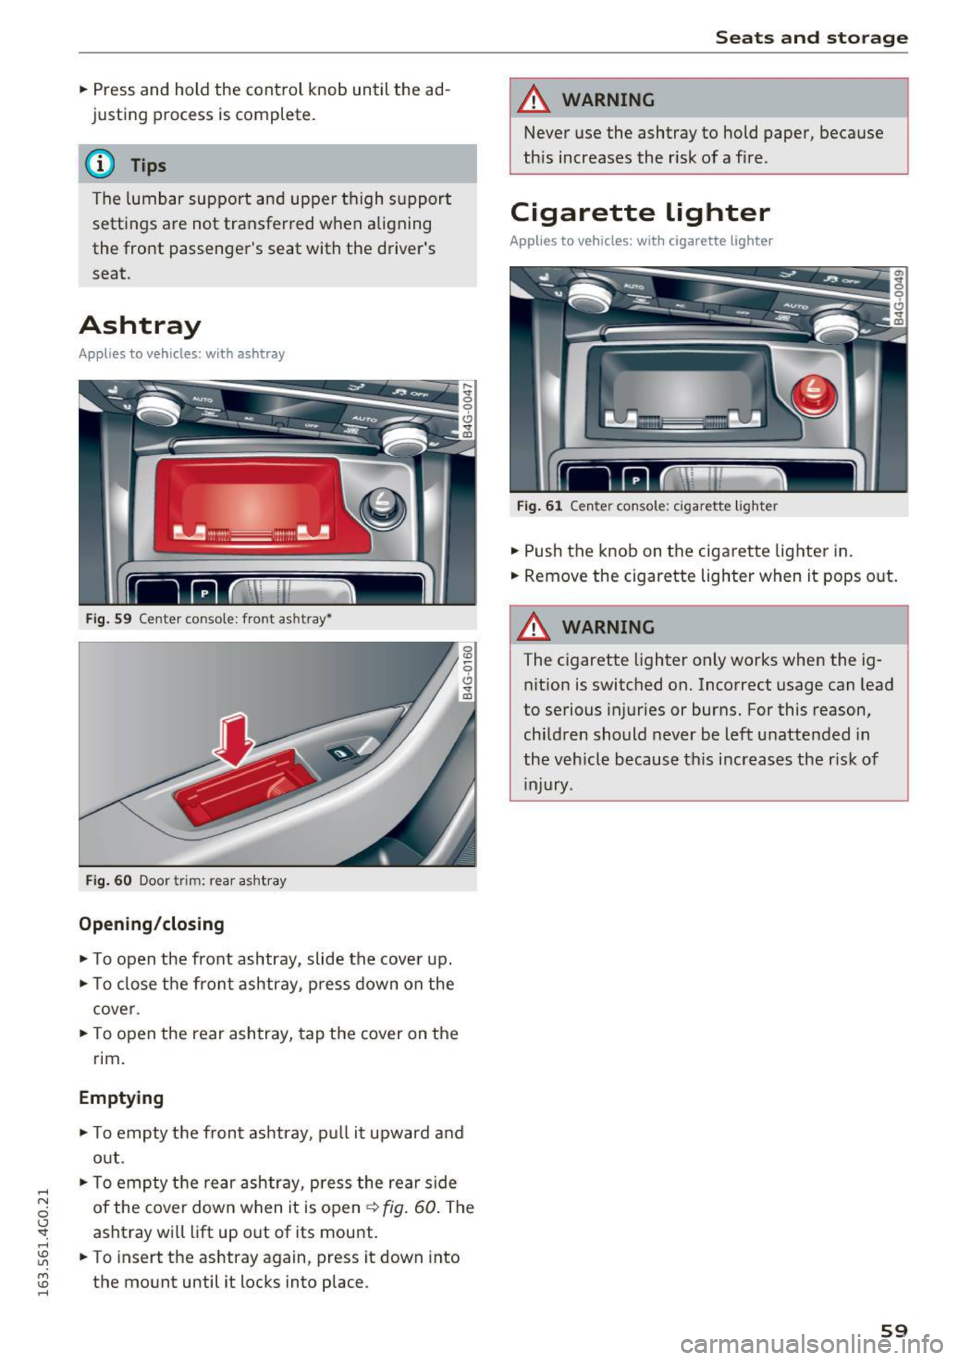 AUDI A6 2016  Owners Manual .... N 
0 CJ <I: .... I.Cl U"I 
M I.Cl ...... 
.. Press  and  hold  the  control  knob  until  the  ad­
justing  process  is complete. 
(D Tips 
The  lumbar  support  and  upper  thigh  support 
set